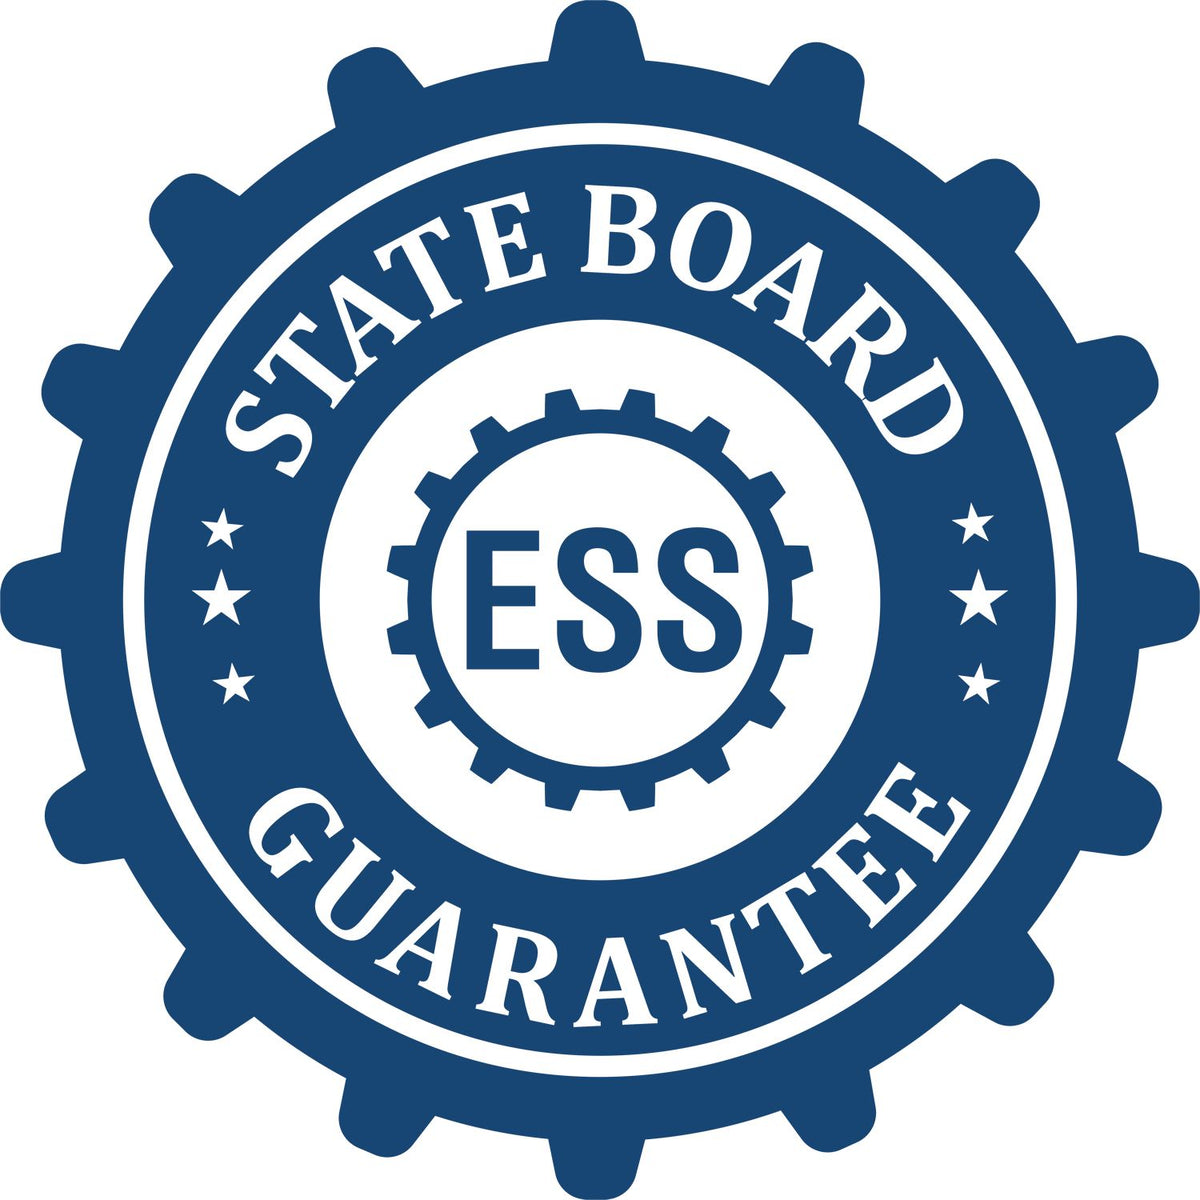 An emblem in a gear shape illustrating a state board guarantee for the Arizona Professional Geologist Seal Stamp